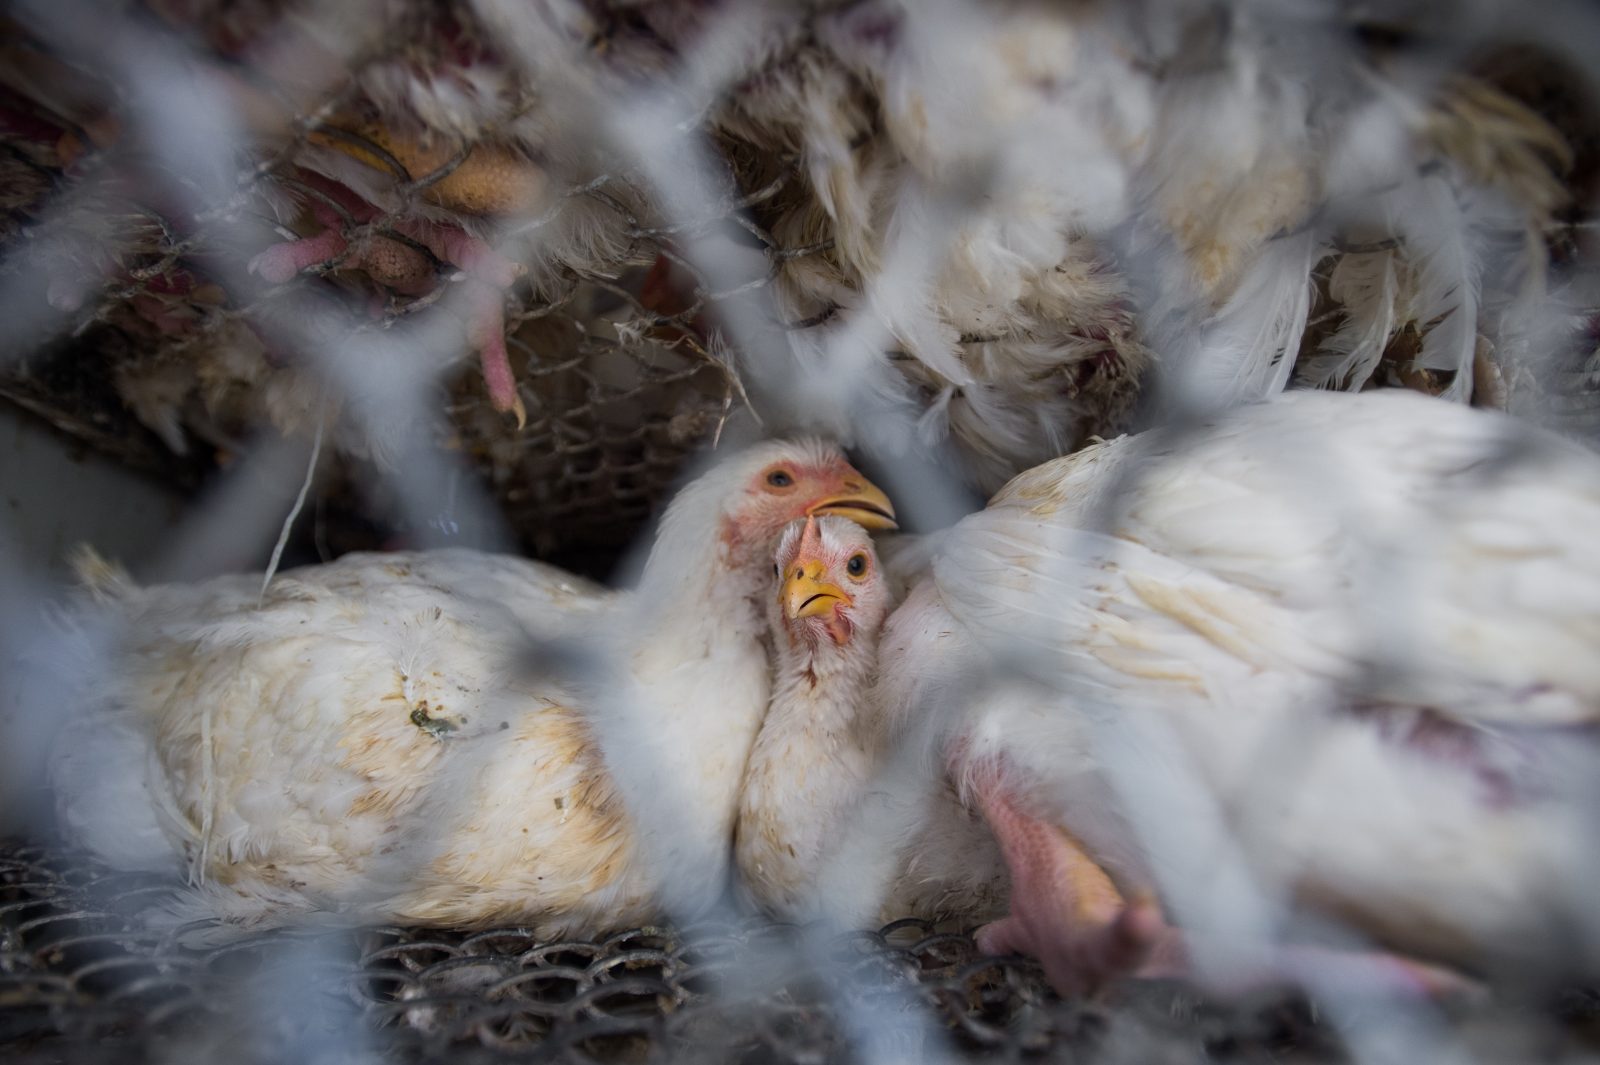 Broiler chickens in transport to slaughter.